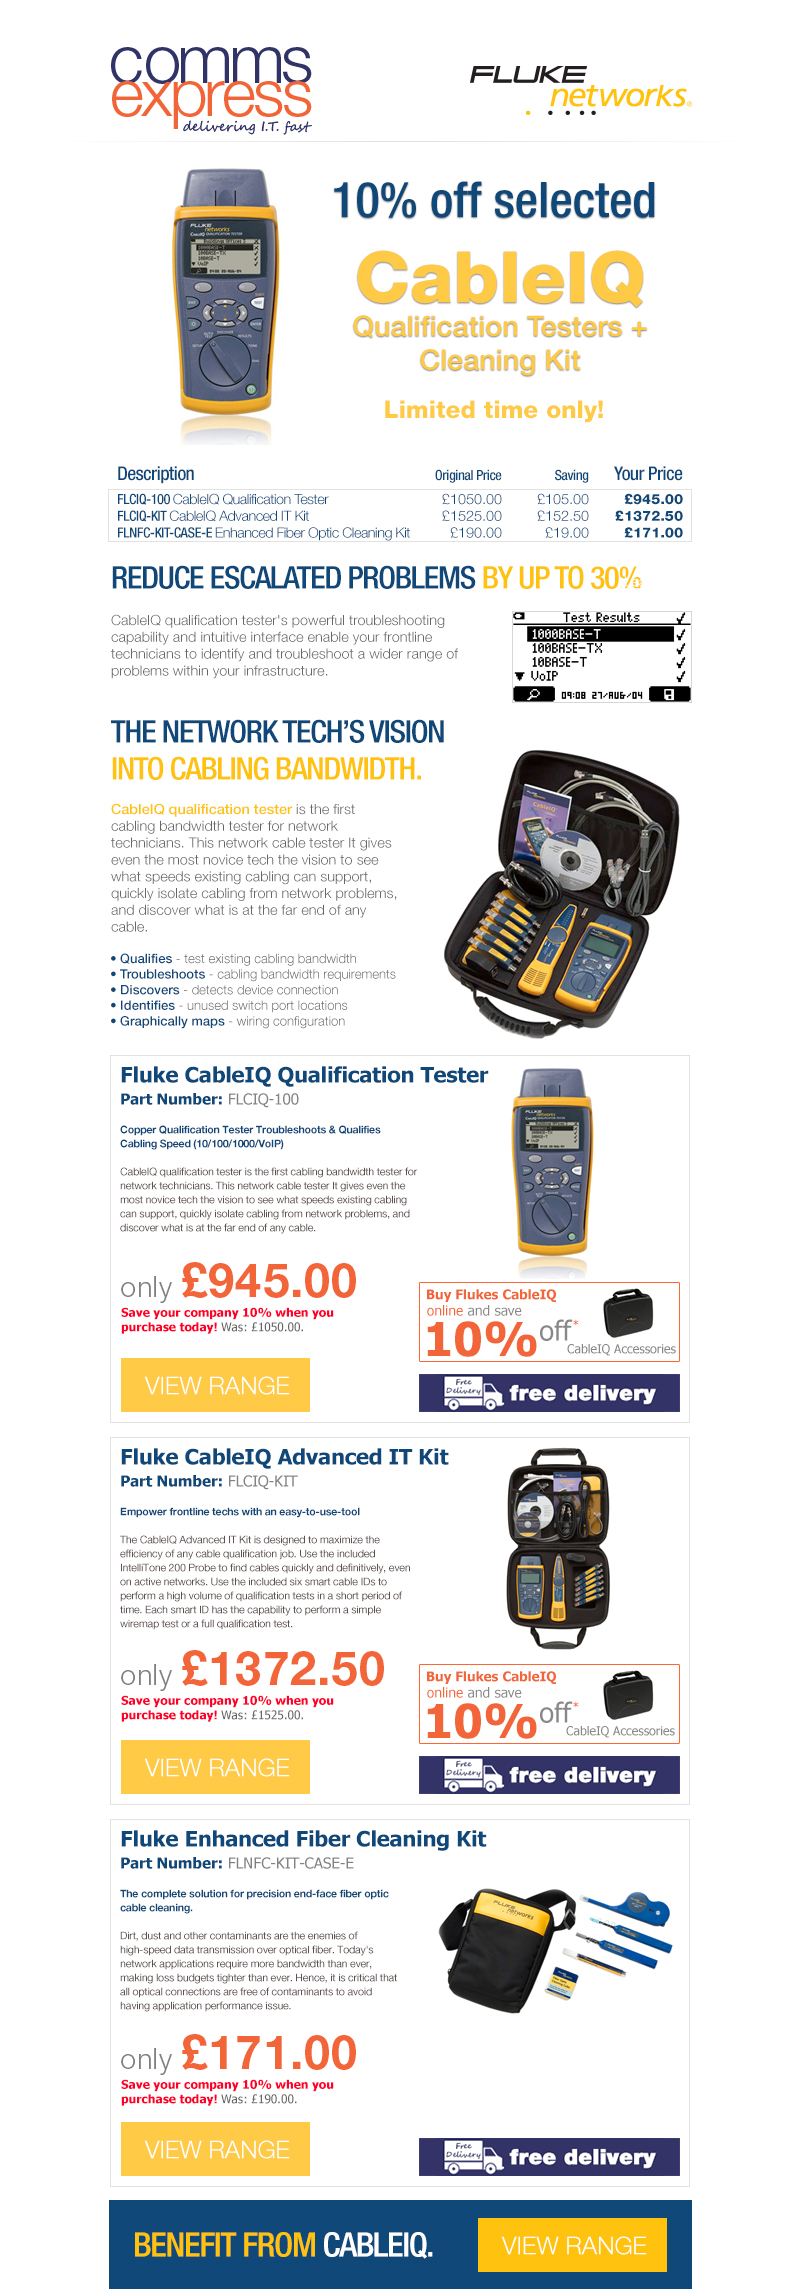 10% Off the Fluke Networks CableIQ Qualification Tester